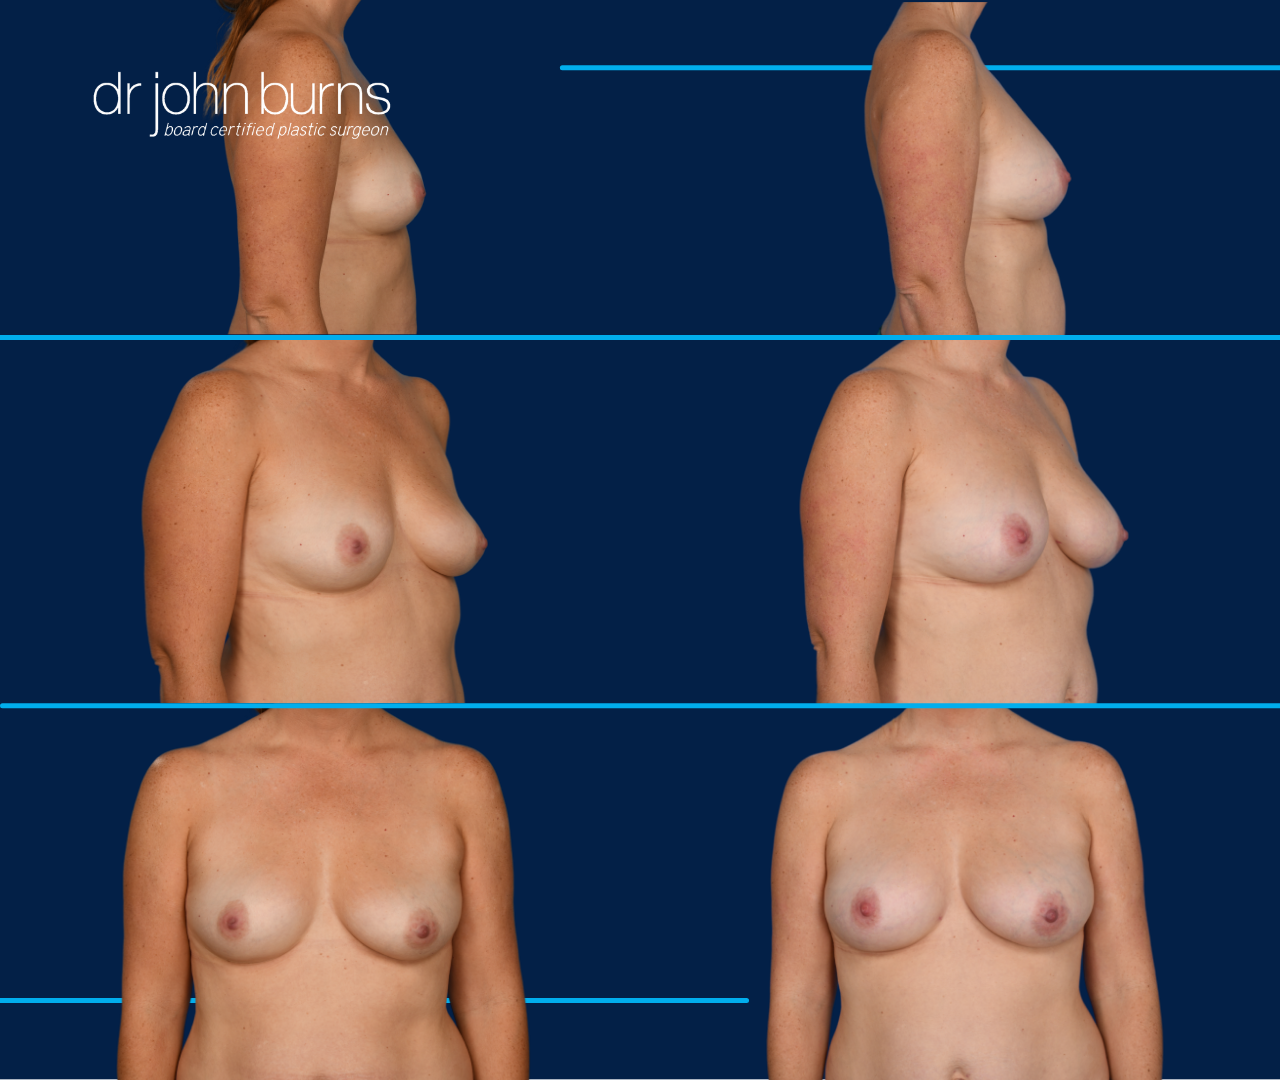 case 10- before and after breast augmentation fat transfer by top plastic surgeon, Dr. John Burns